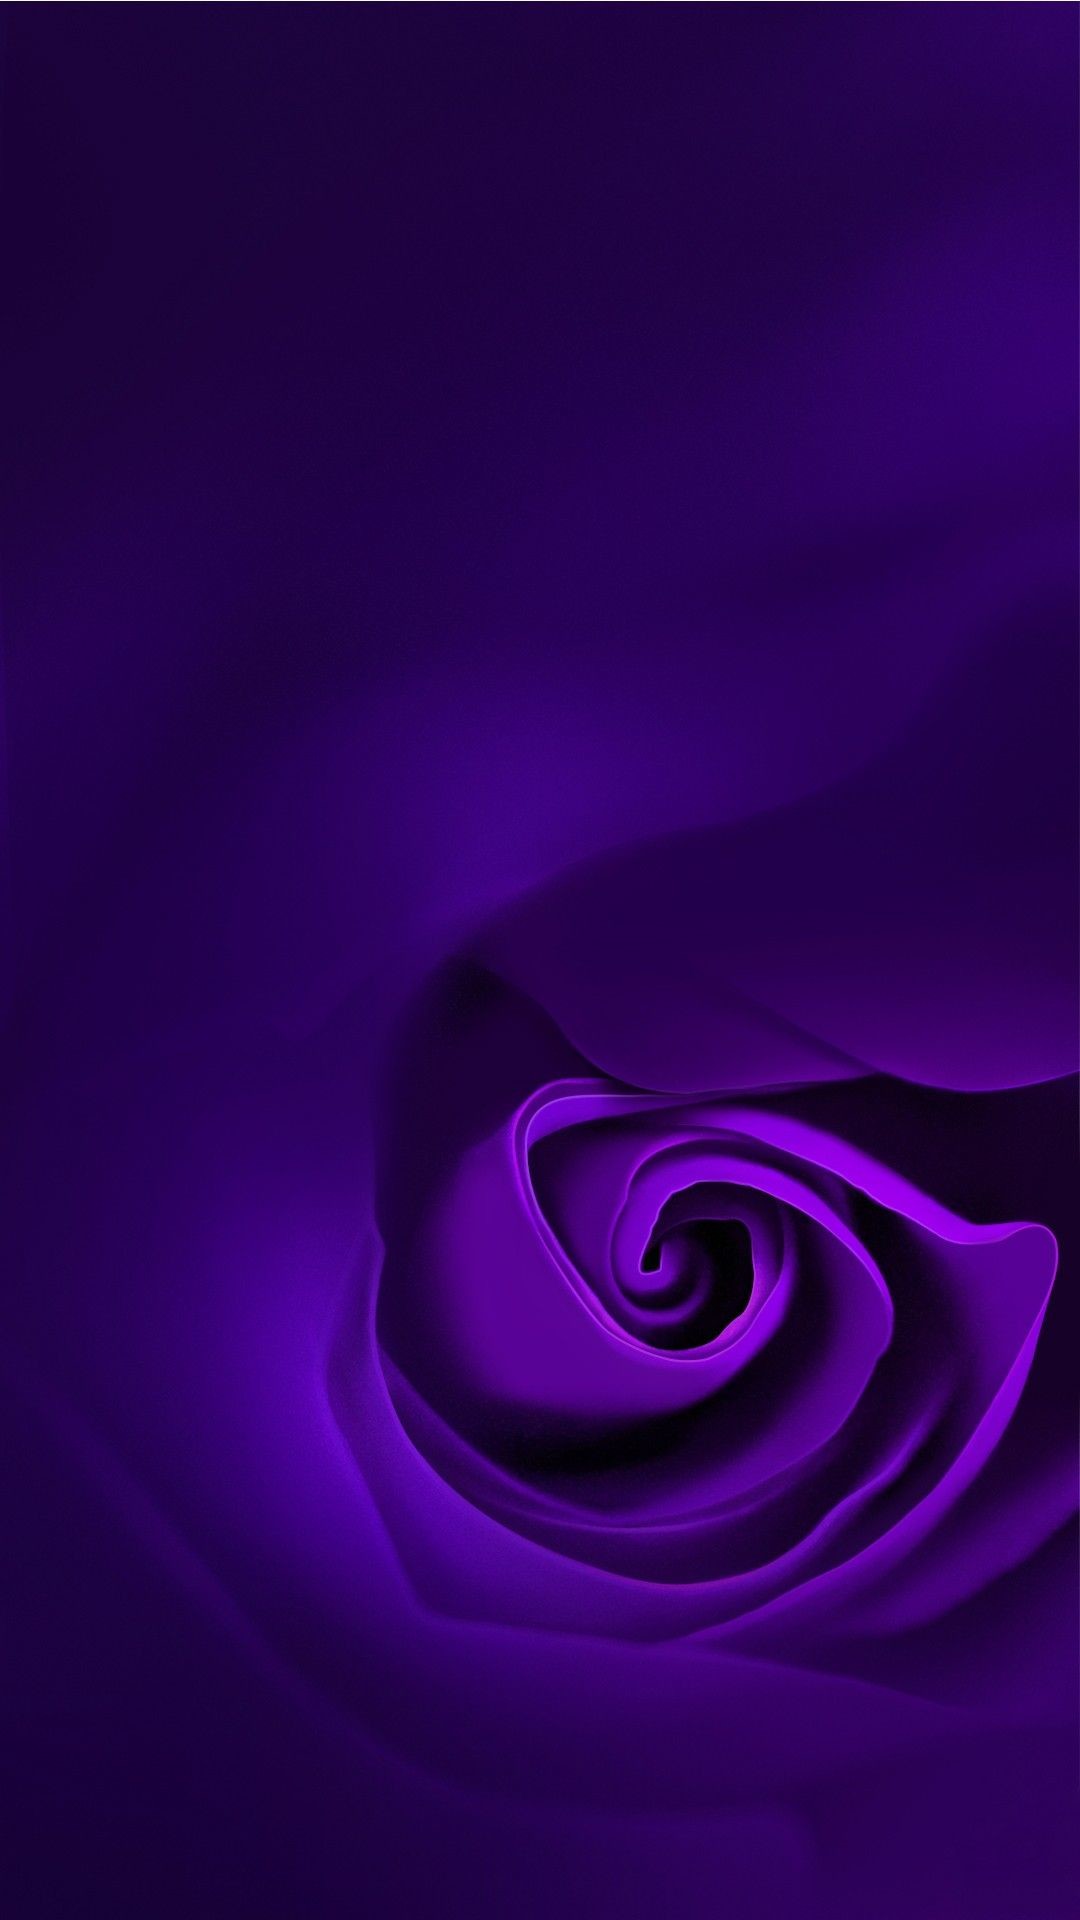 1080x1920 Purple Rose - Tap to see more #Oppo #stockwallpapers - @mobile9